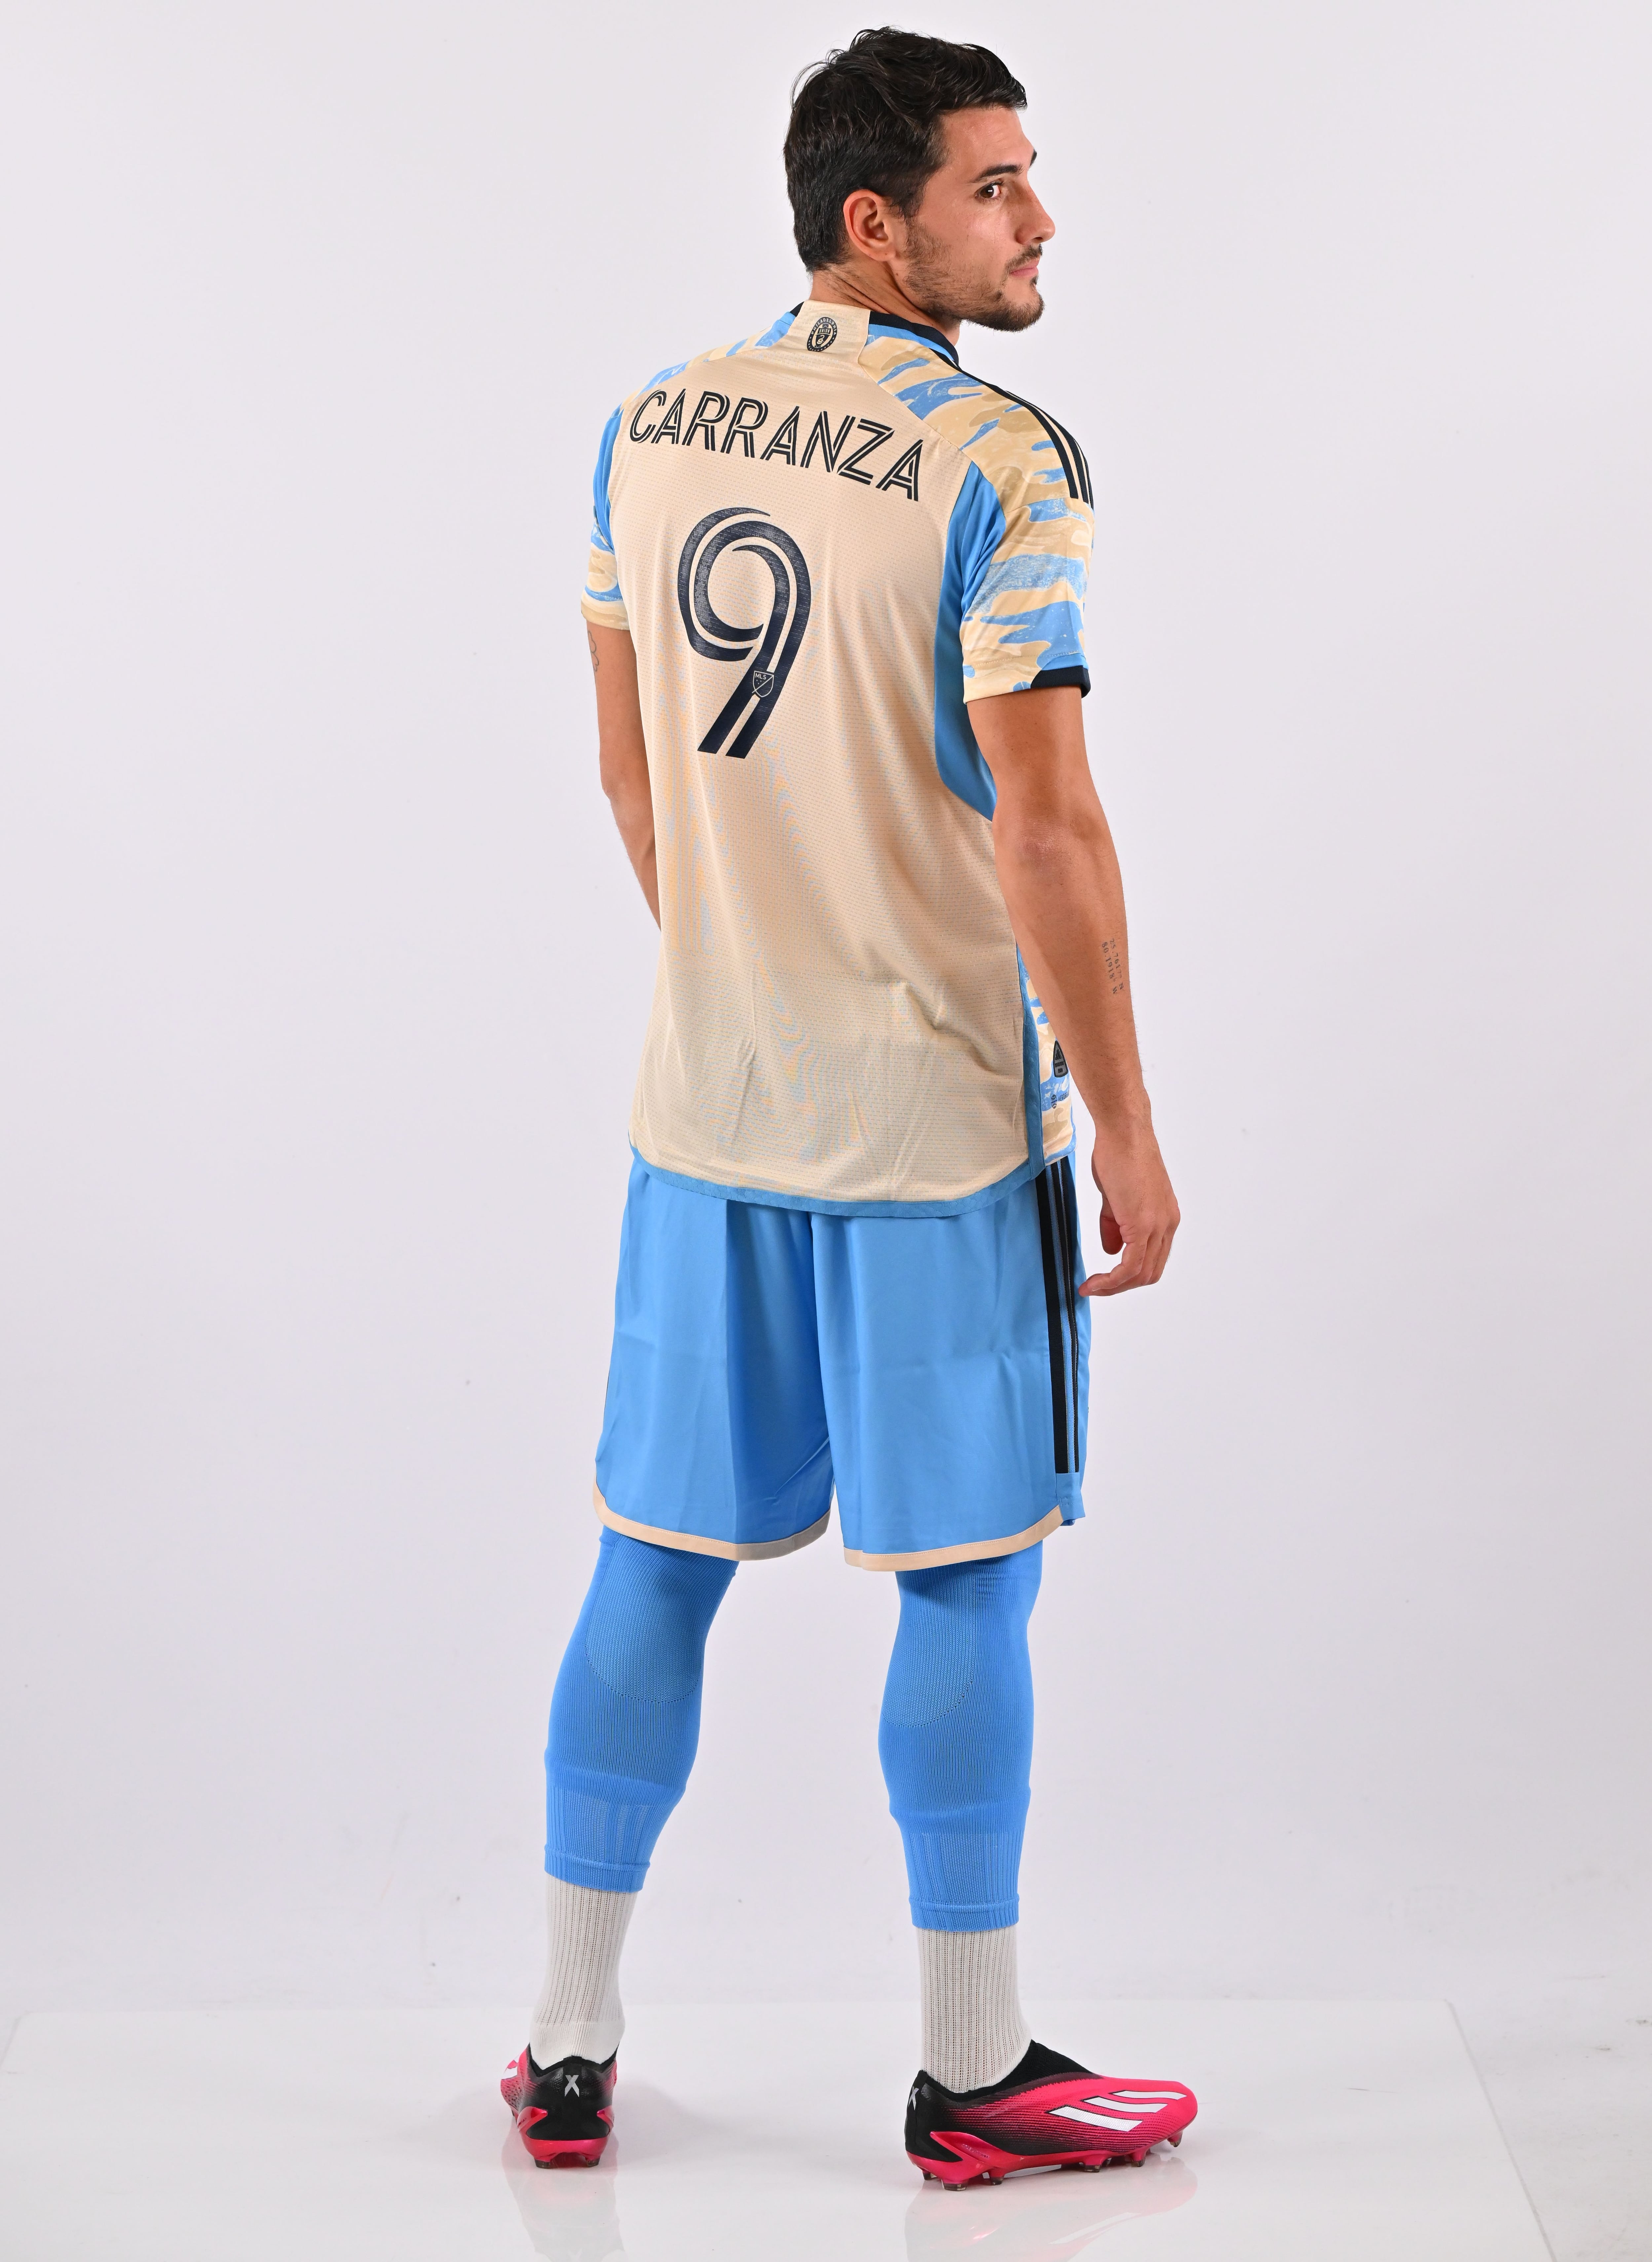 New Philadelphia Union jersey for 2023 has camo theme in blue and